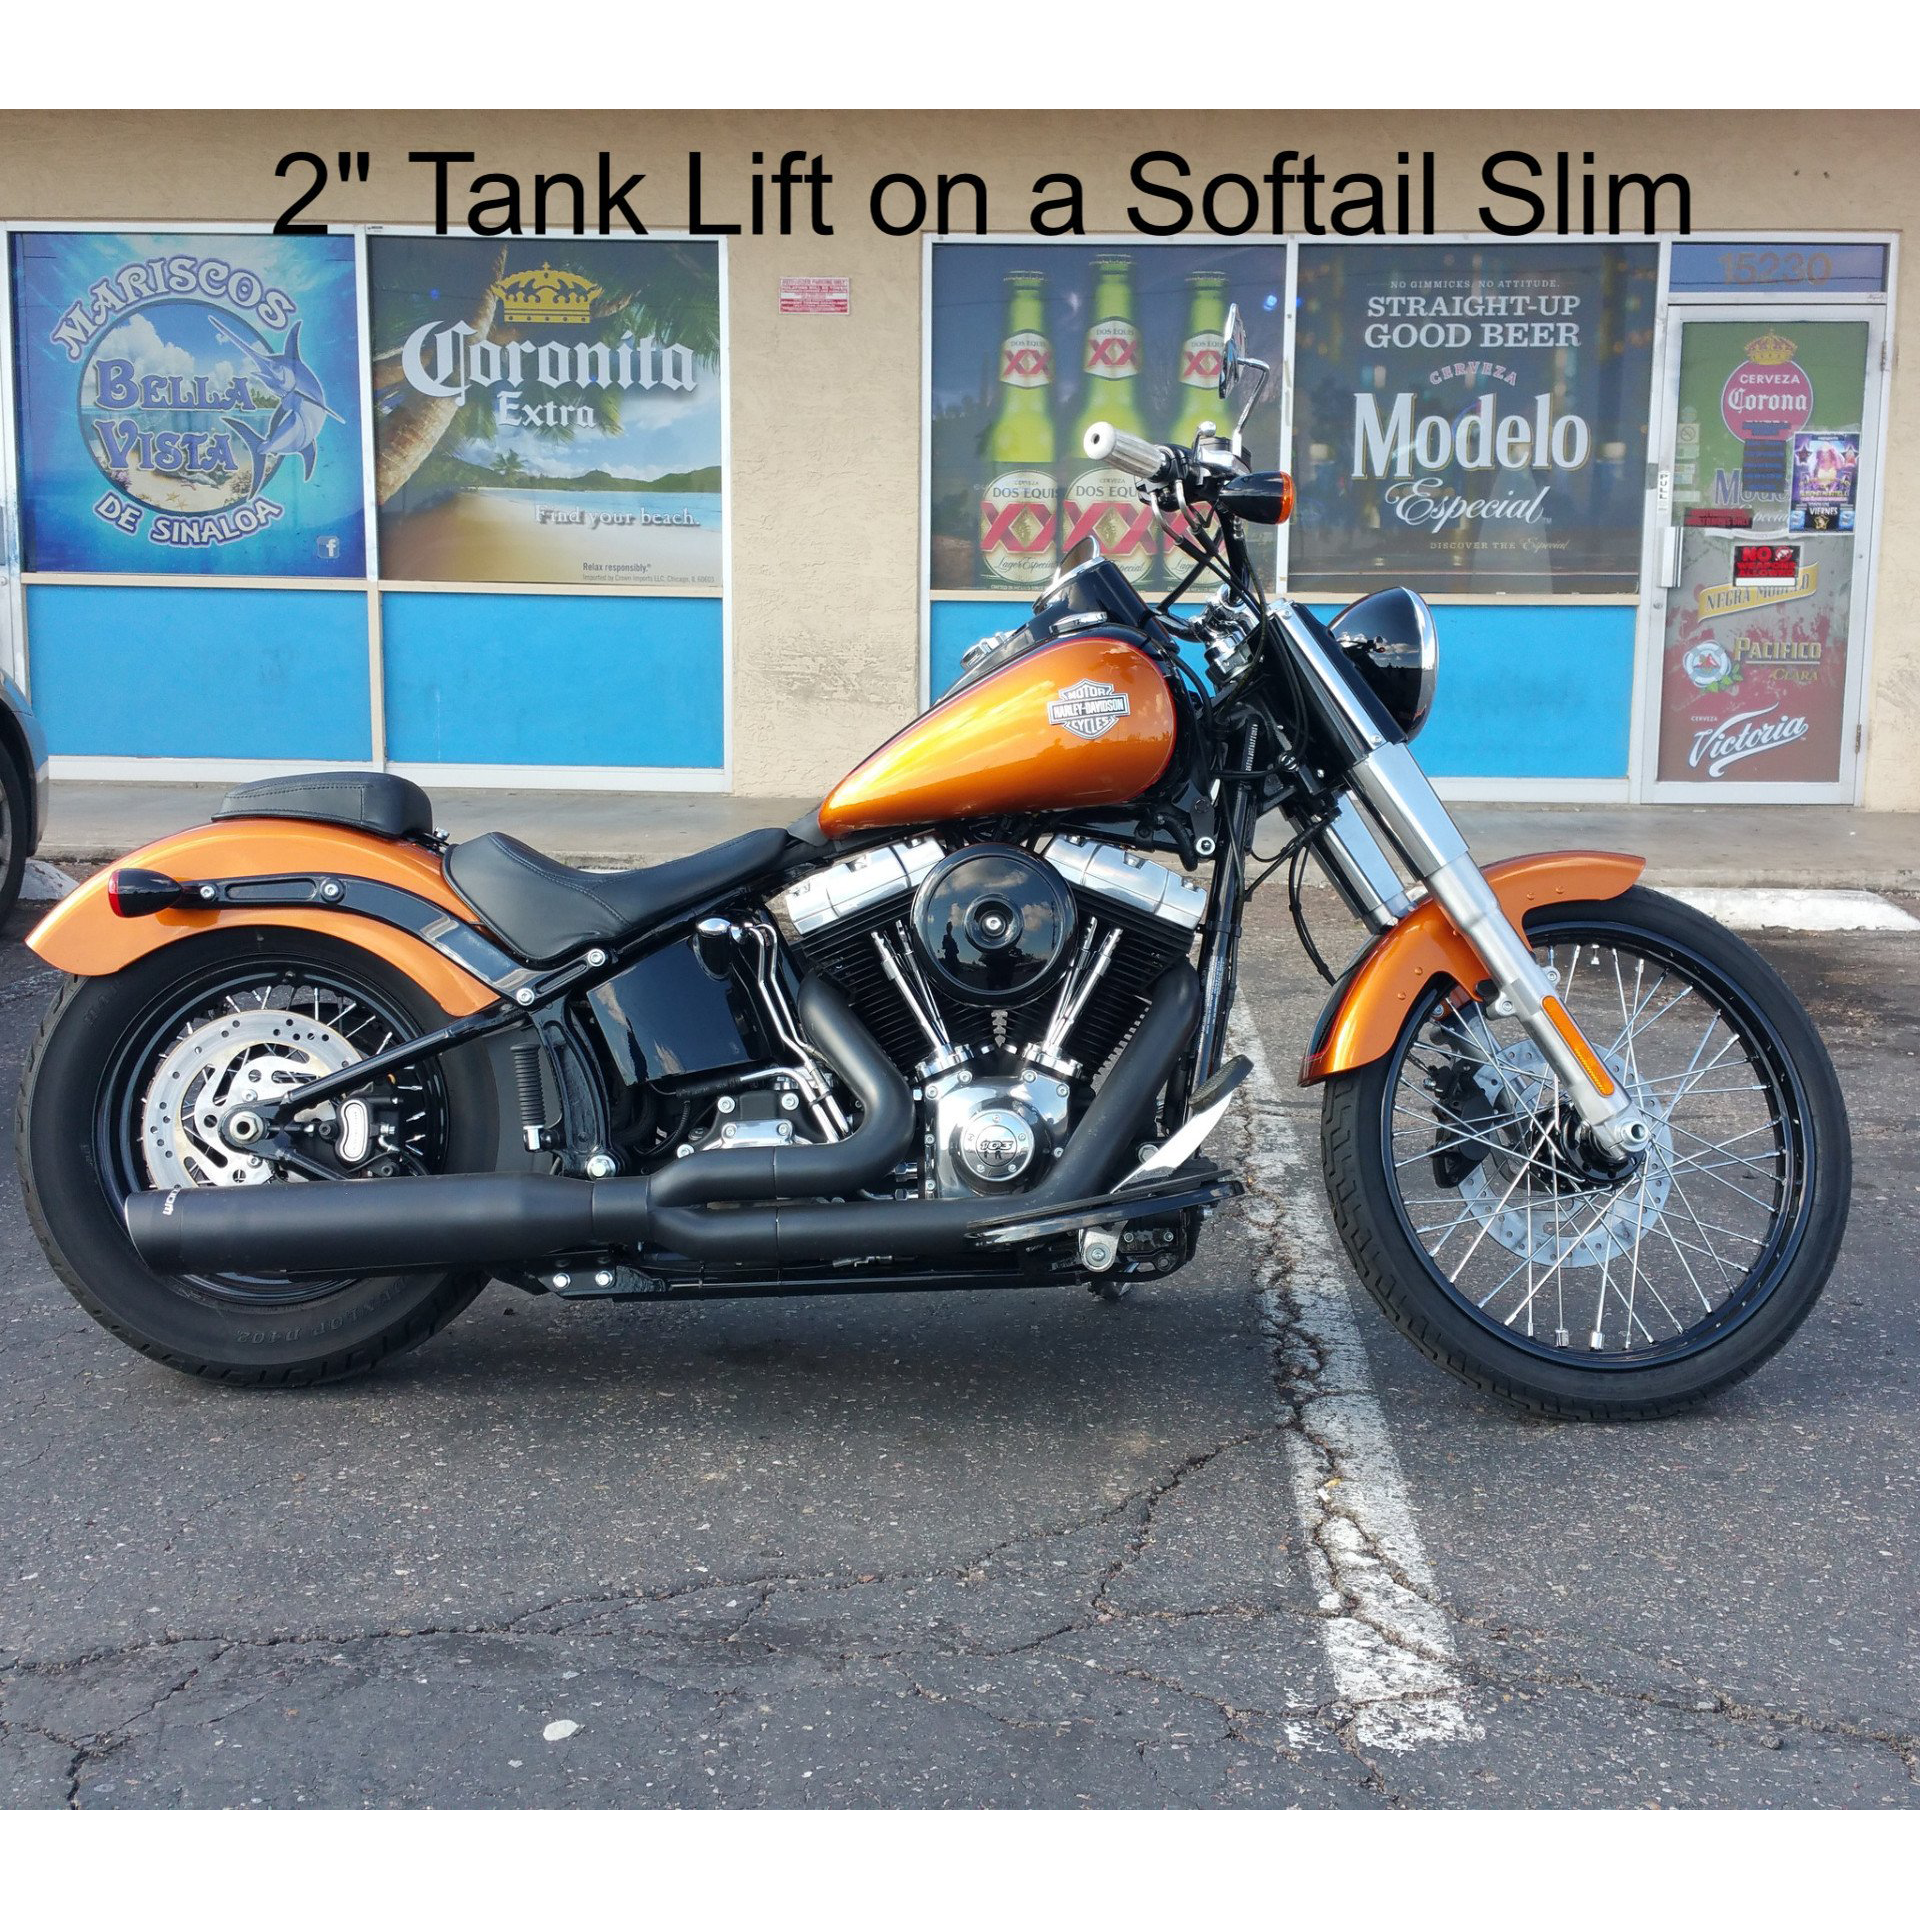 Gas Tank Lift Kit for Softail Models 2000-2017